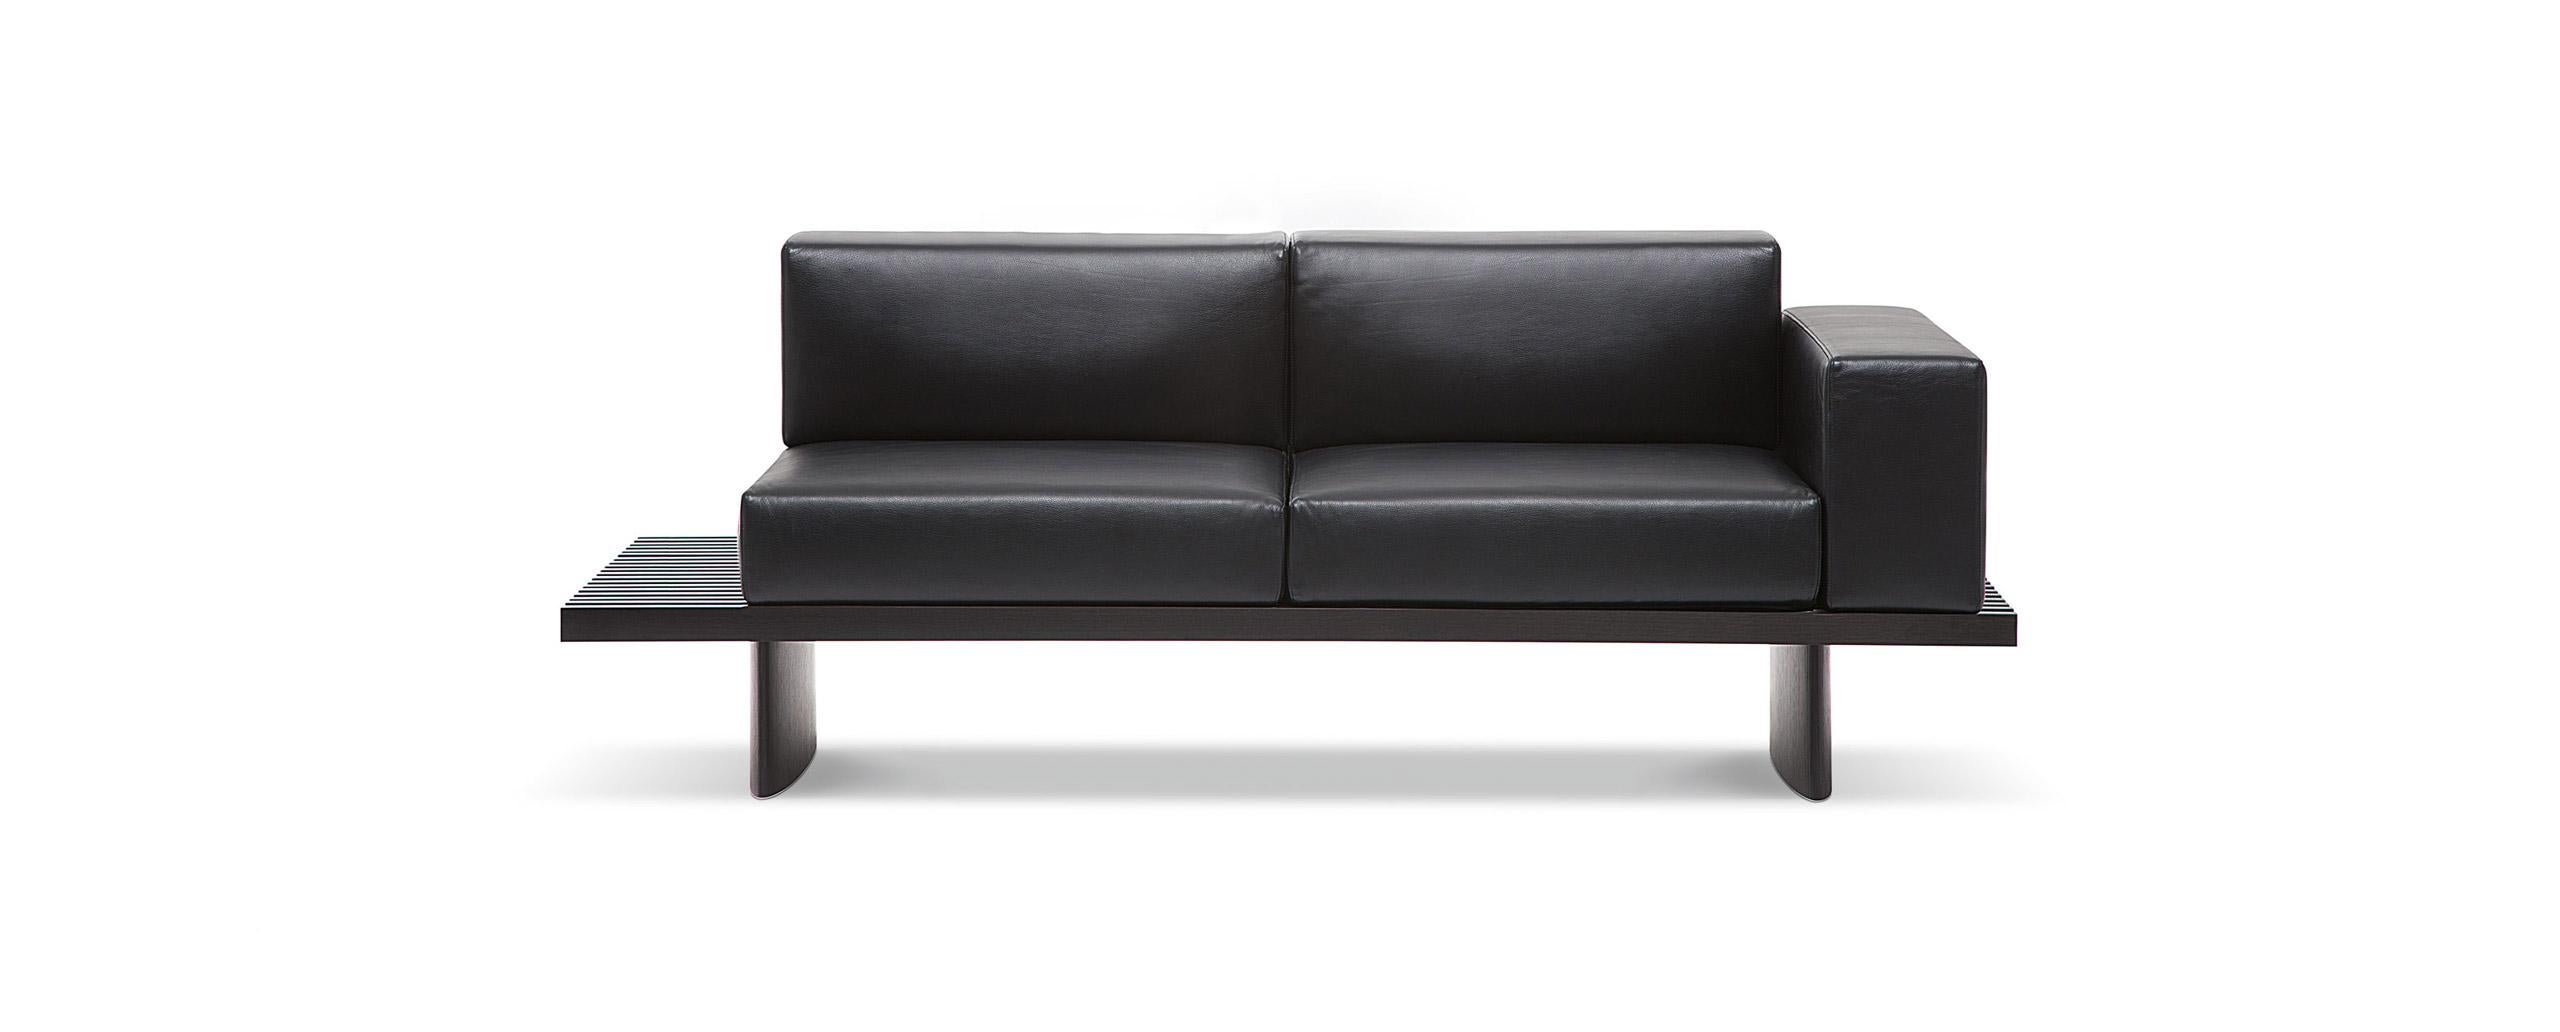 Mid-Century Modern Charlotte Perriand Refolo Modular Sofa, Wood and Black Leather by Cassina